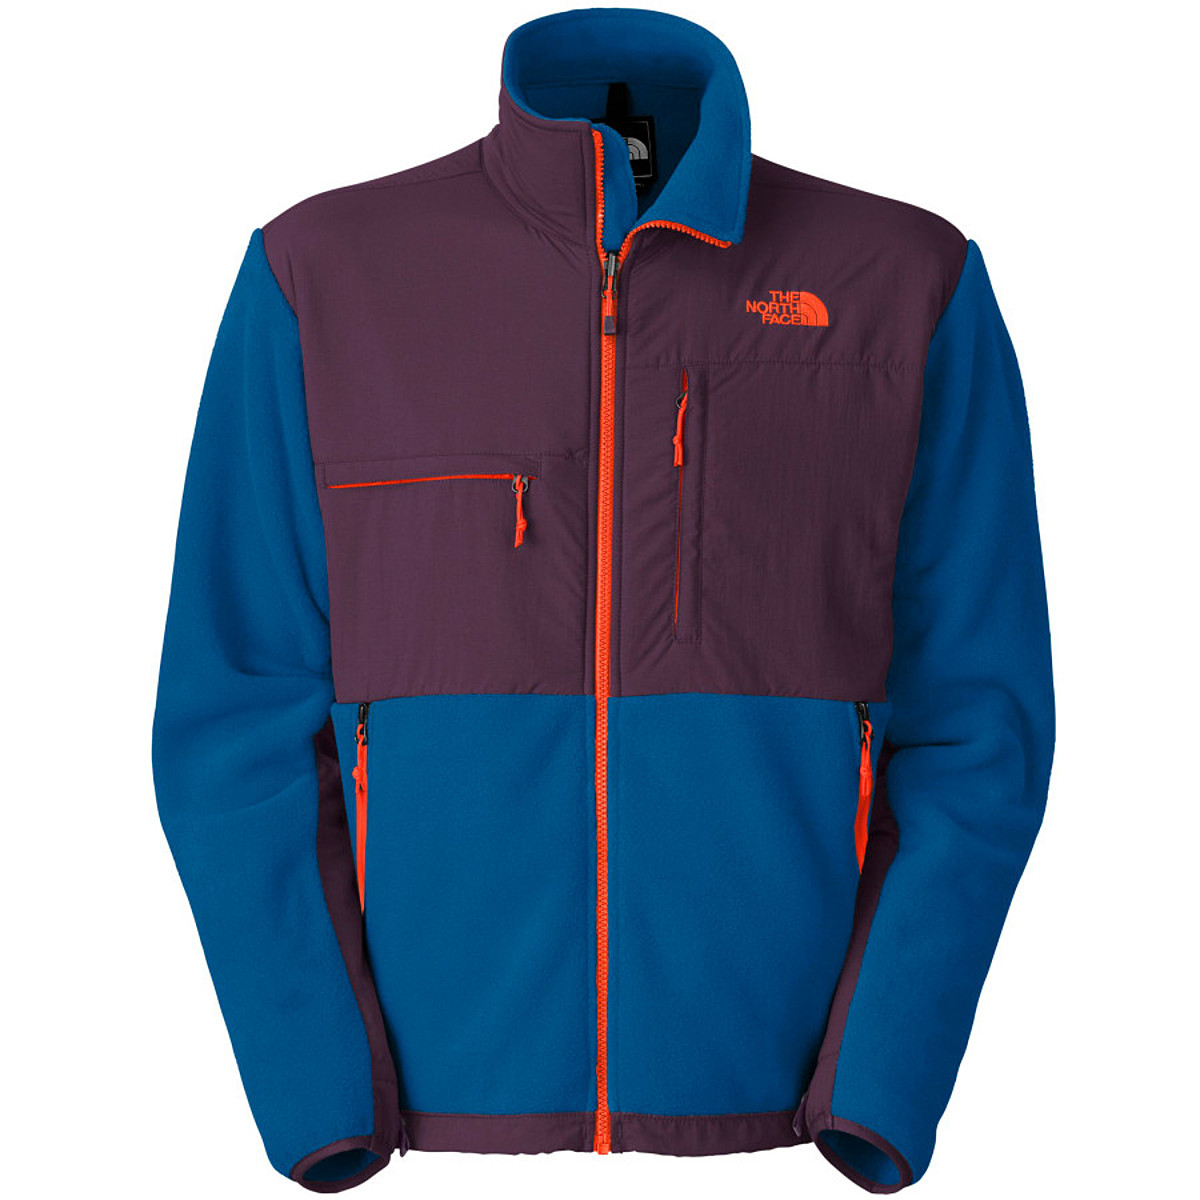 The North Face Denali Hoodie Reviews - Trailspace